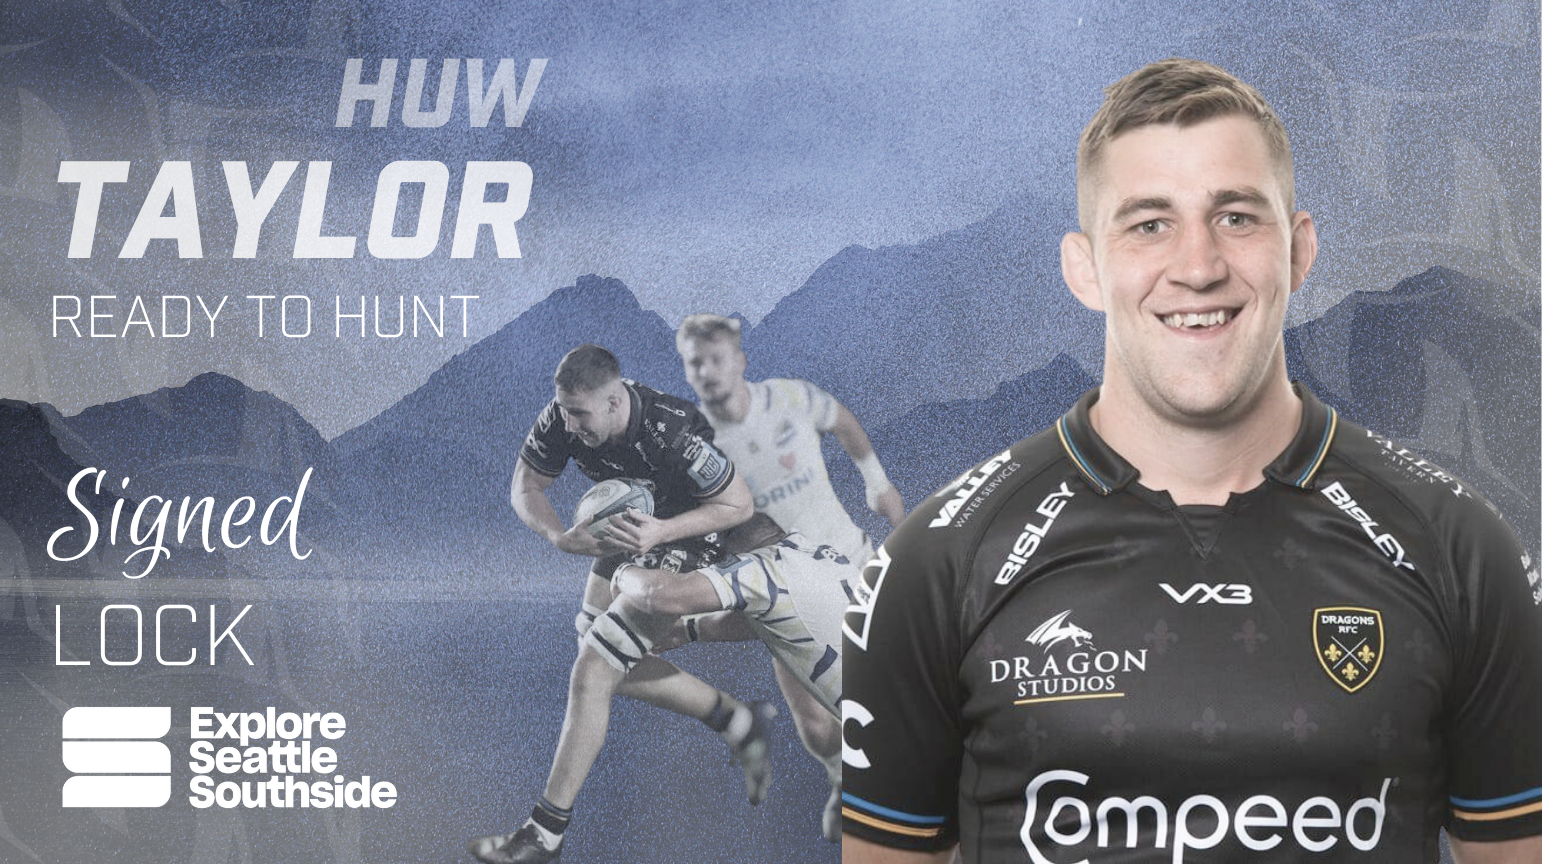 HUW TAYLOR JOINS SEATTLE SEAWOLVES RUGBY